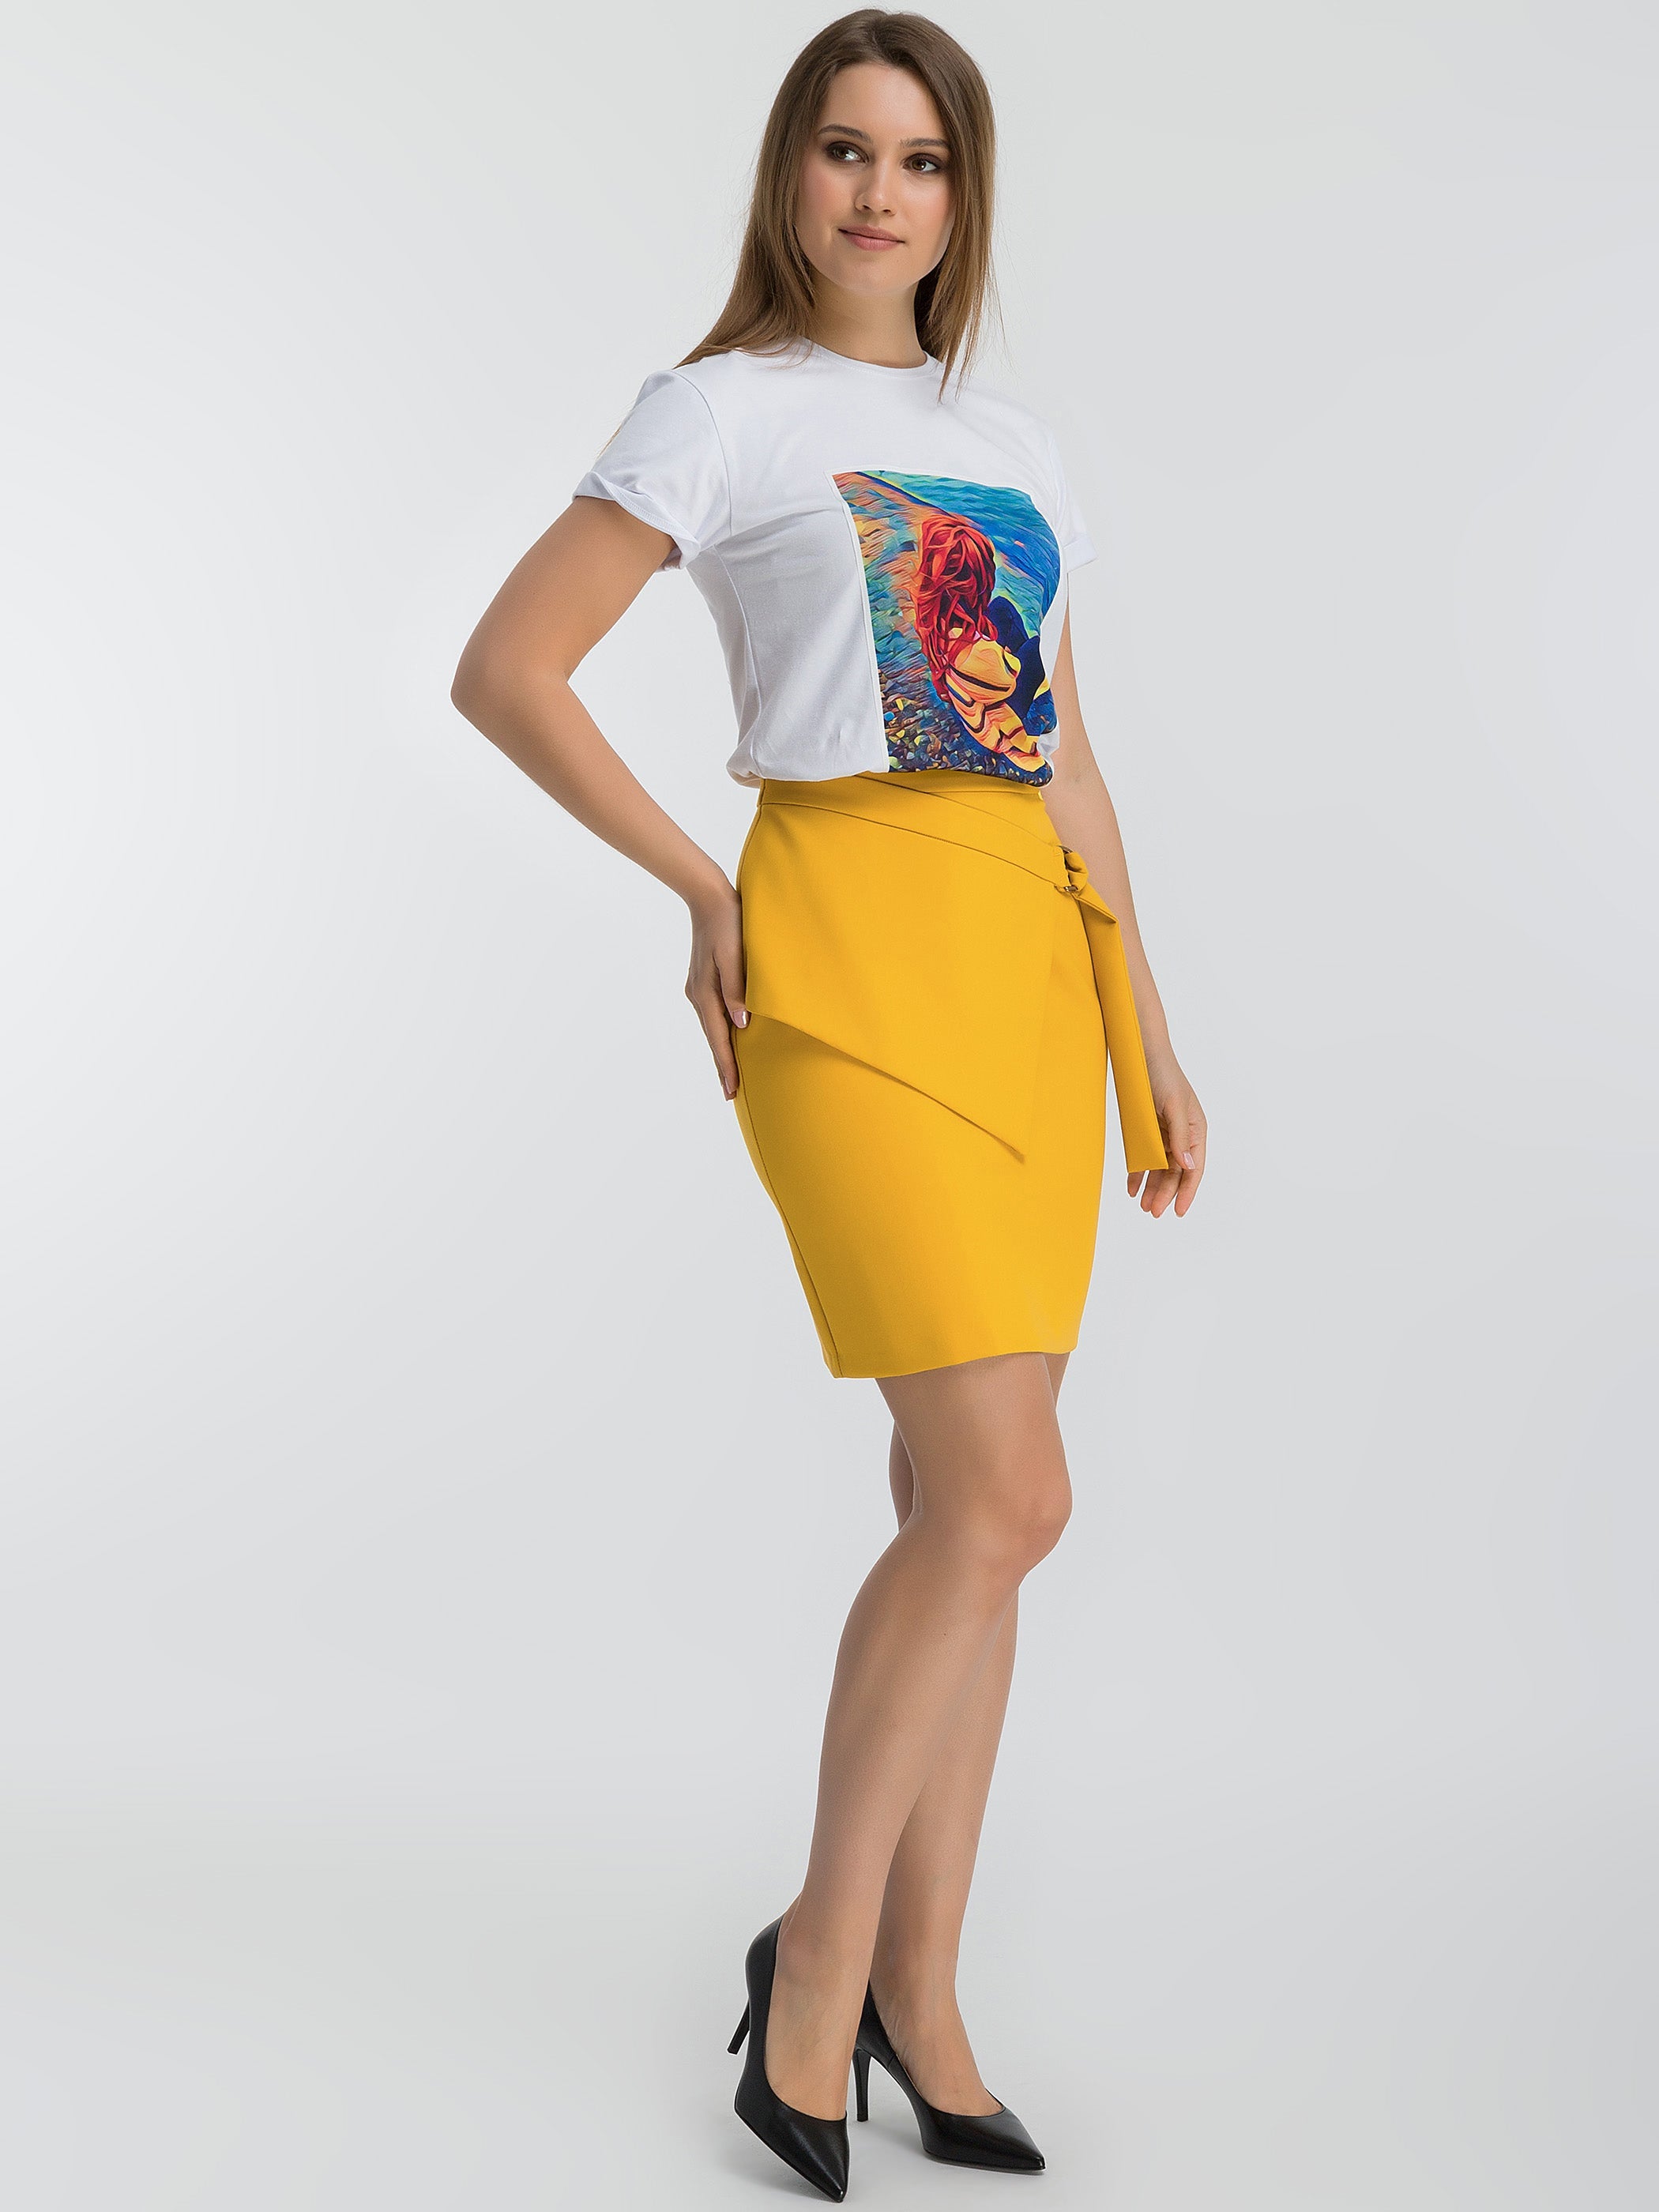 T-Shirt "The Girl by Lake Sevan" by AG Sisters